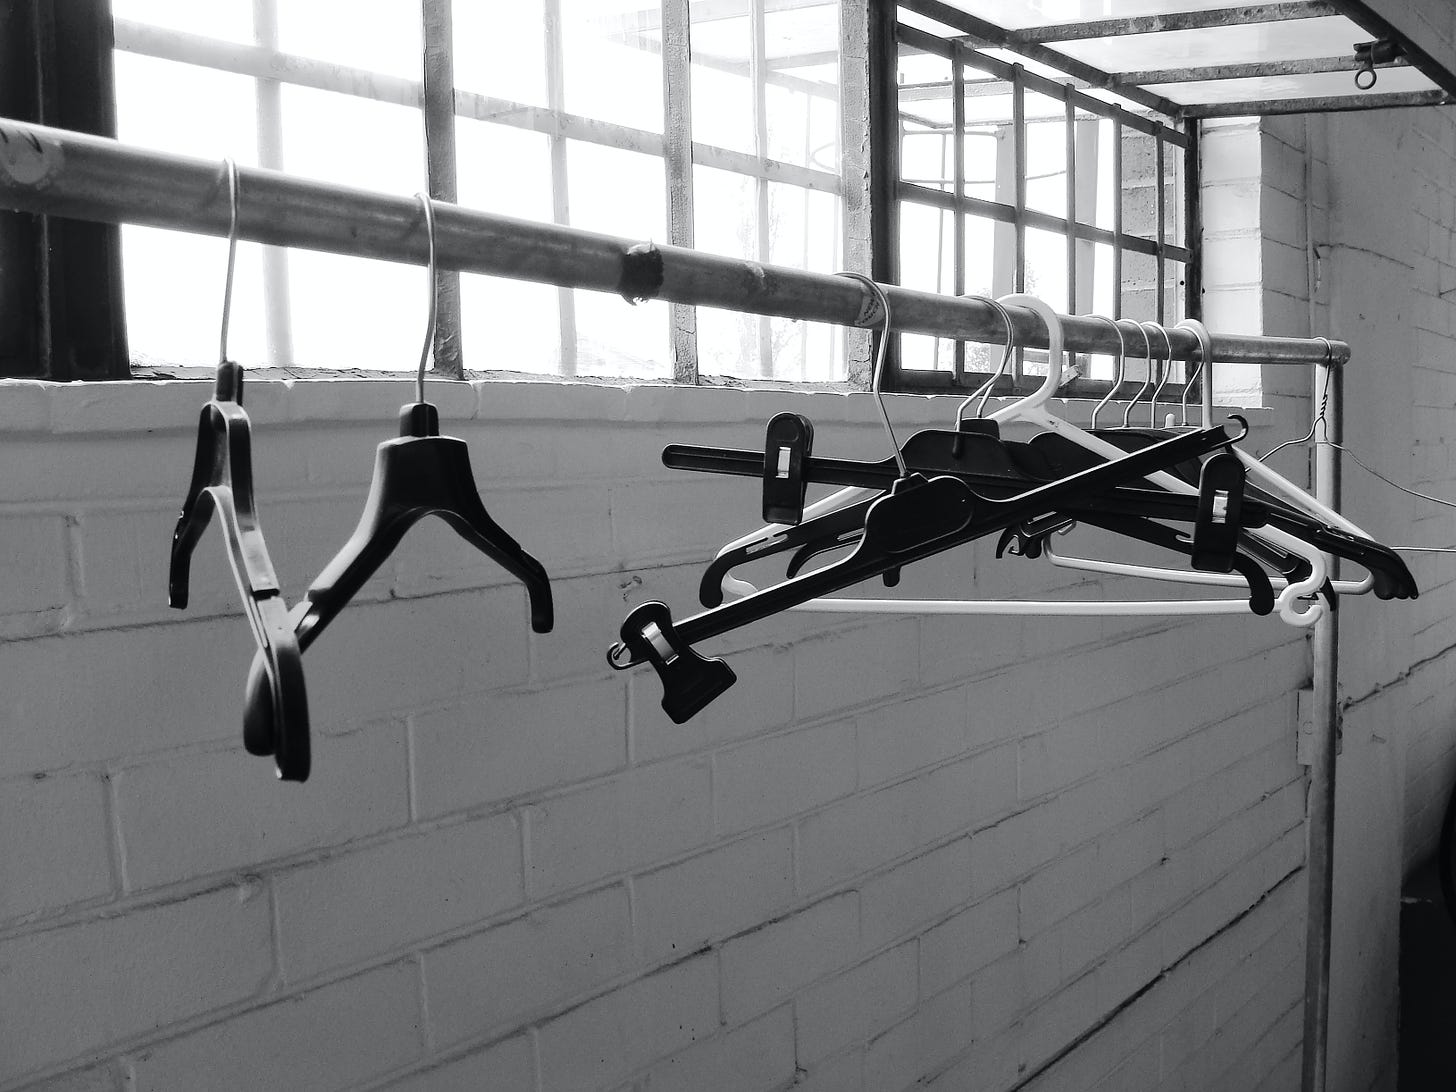 Empty coat hangers hang on a metal bar by an open window and against a brick wall